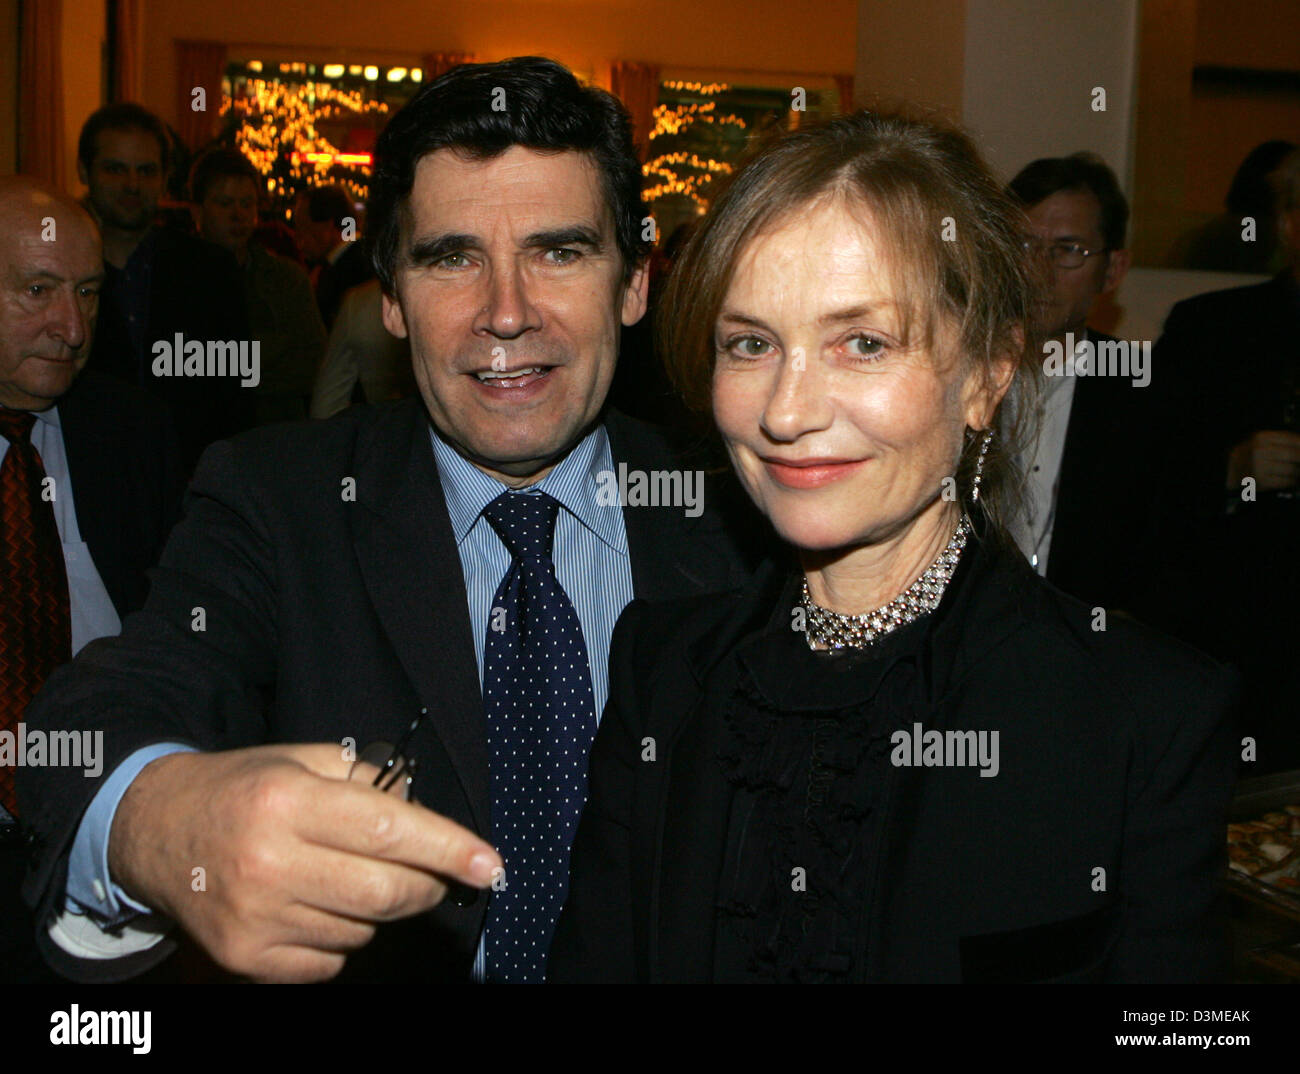 French ambassador Claude Martin and French actress Isabelle Huppert are pictured during the party for the premiere of the film 'L'Ivresse Du Pouvoir' at the 56th International Film Festival in Berlin, Thursday, 16 February 2006. The film directed by Claude Chabrol runs in the competition at this year's film festival. Photo: Jens Kalaene Stock Photo